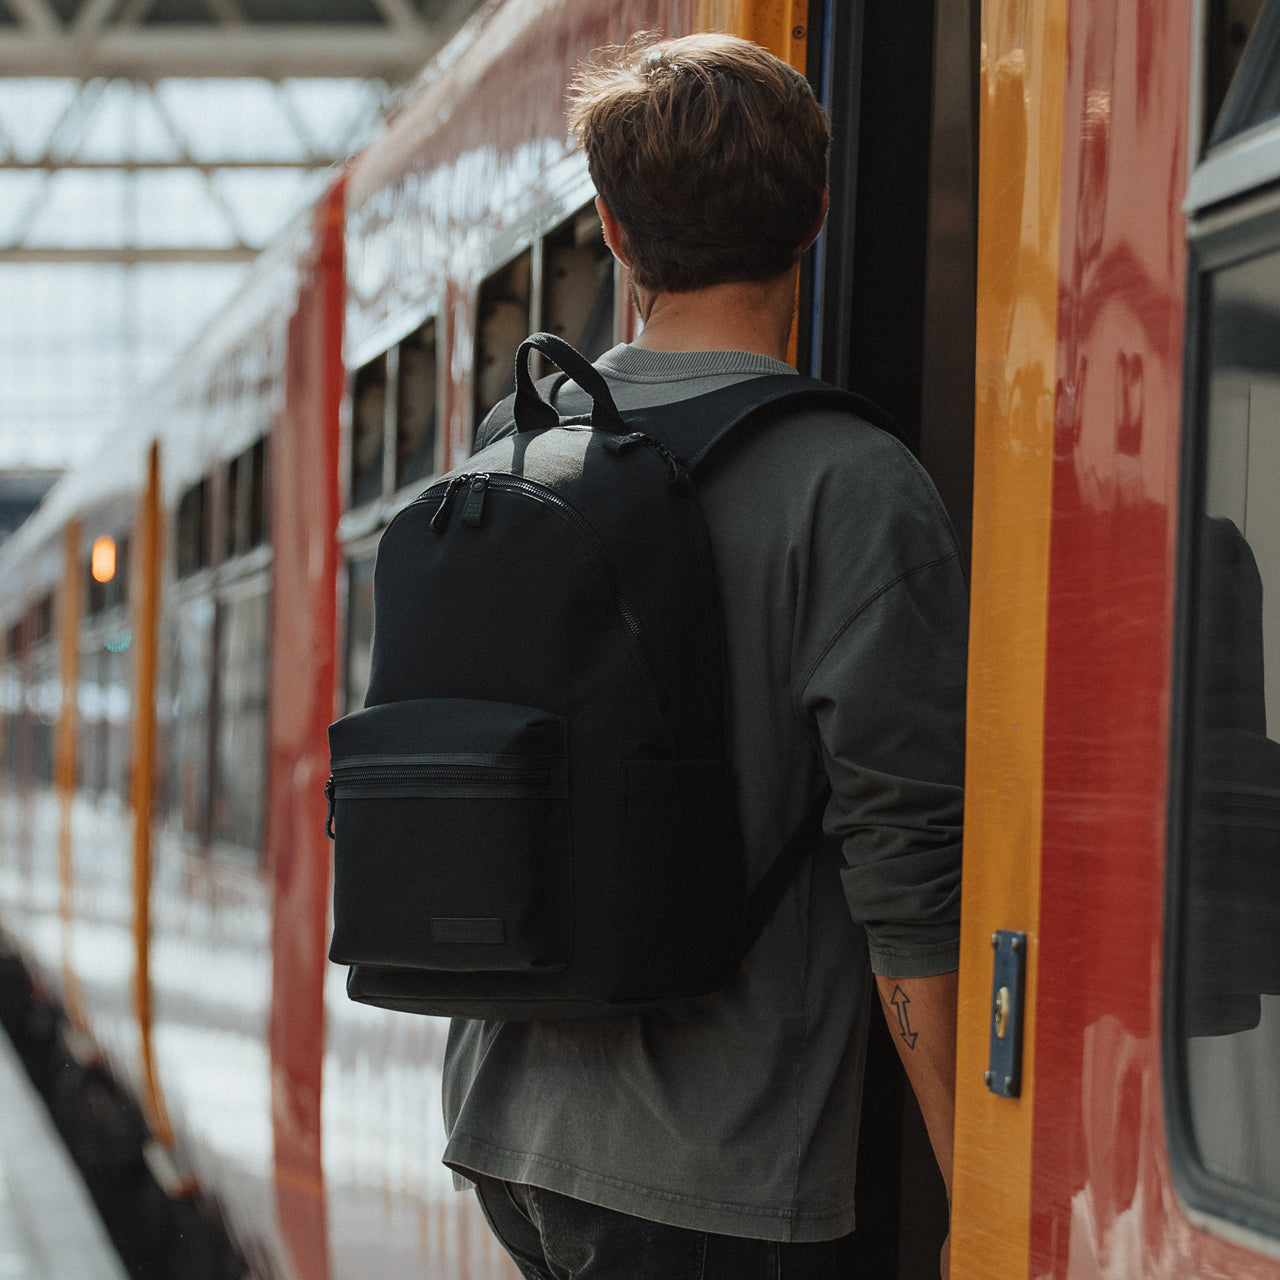 The 13 Best Laptop Bags for Business Travel of 2023